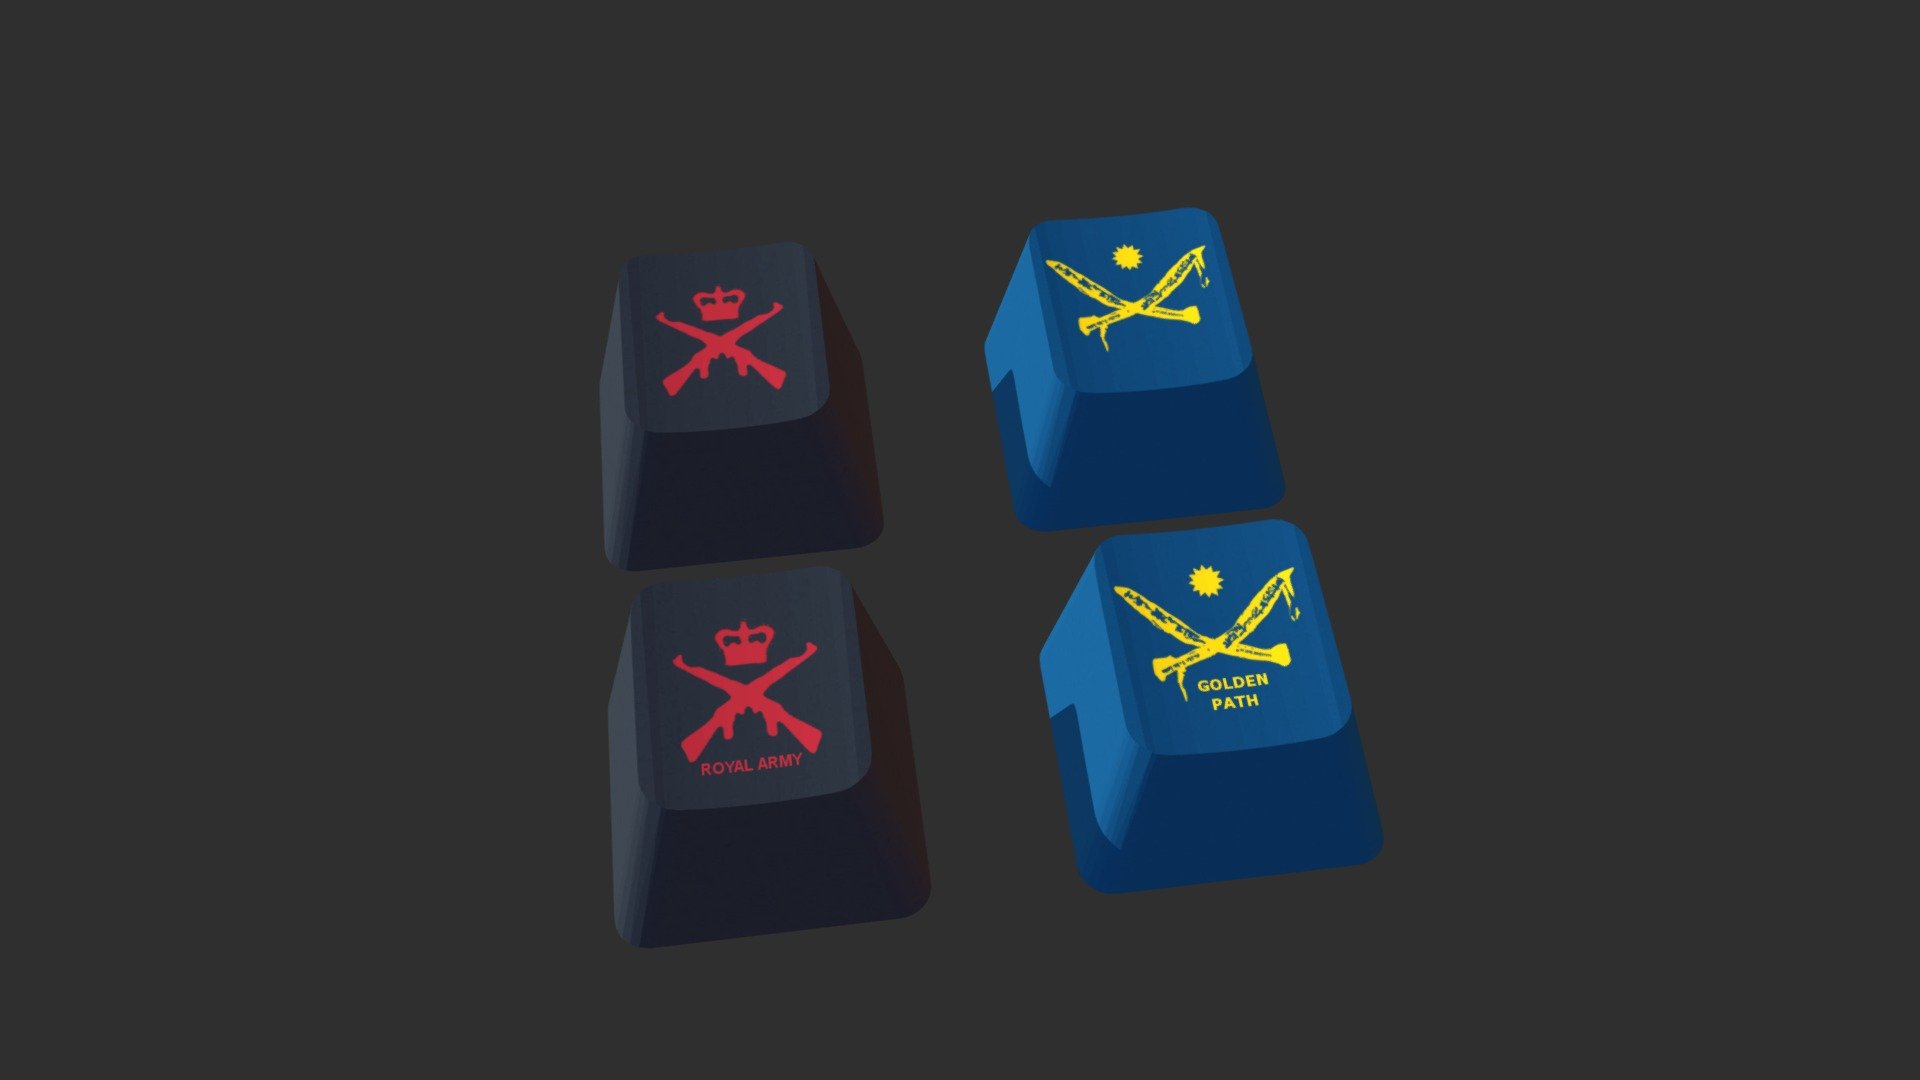 Far Cry 4 Keycaps 3d Model By Drlecter Drlecter 28d76d2